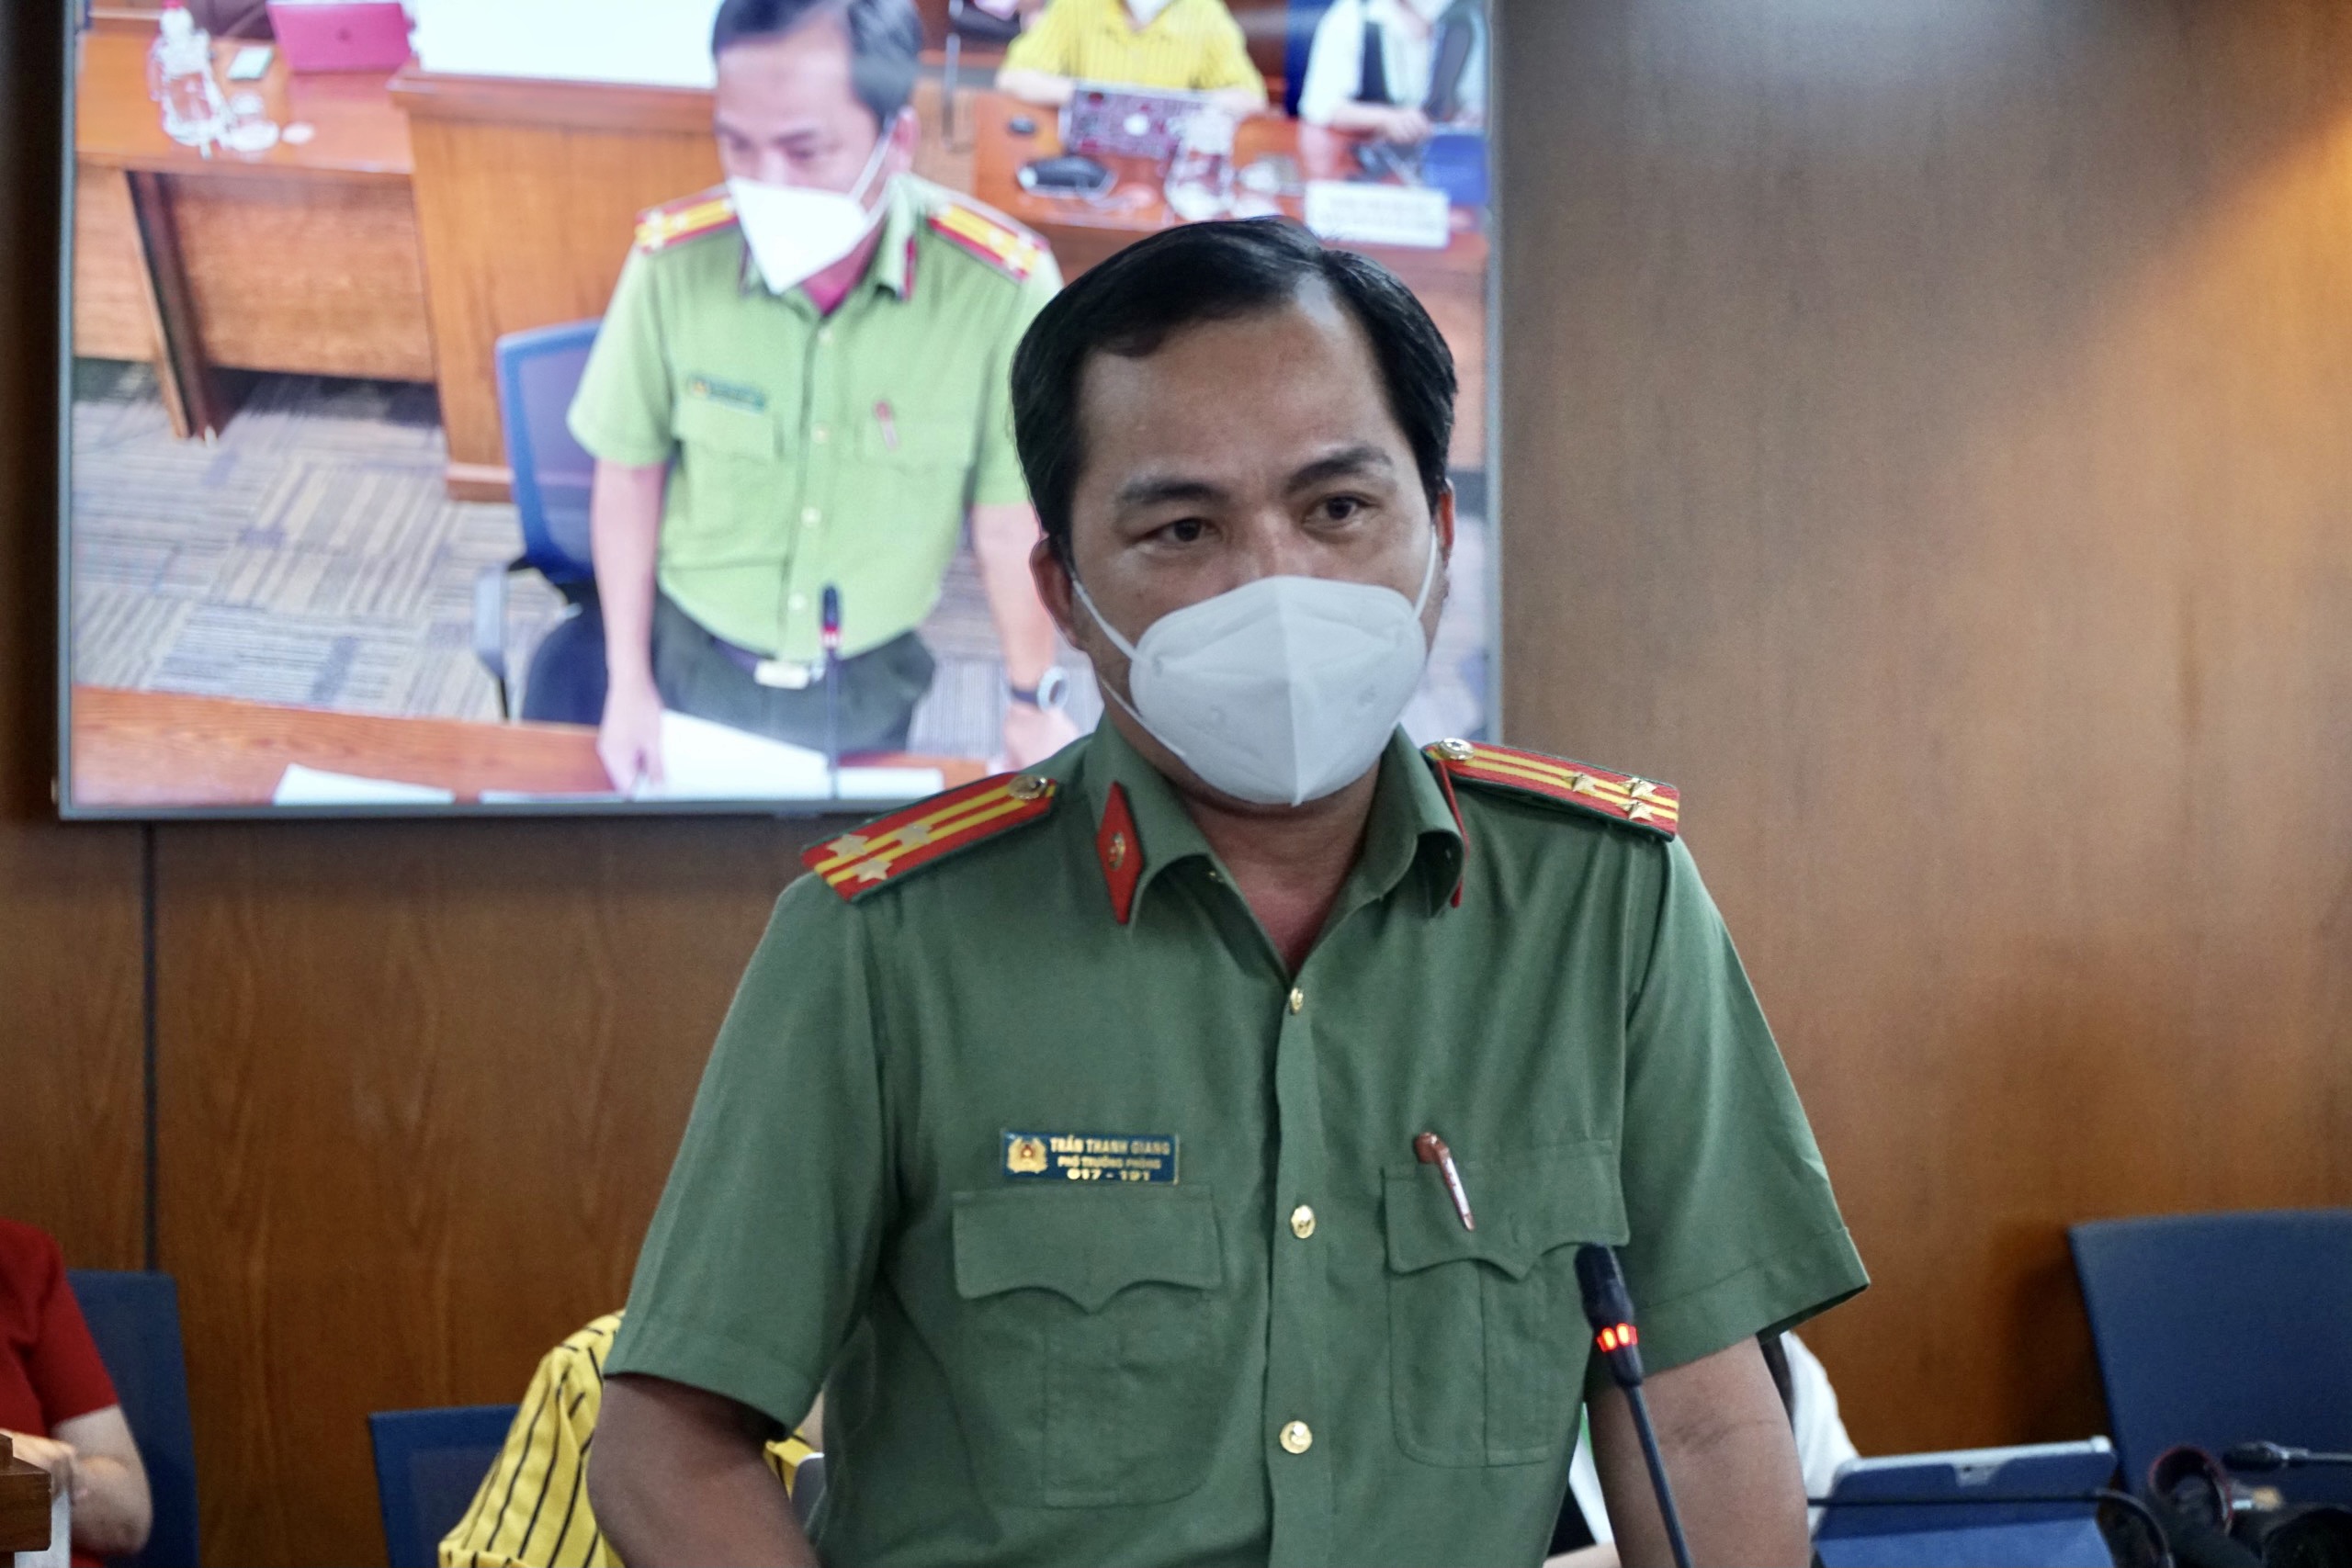 Ho Chi Minh City police impose fines worth over $52,000 on first days of loosened COVID-19 restrictions